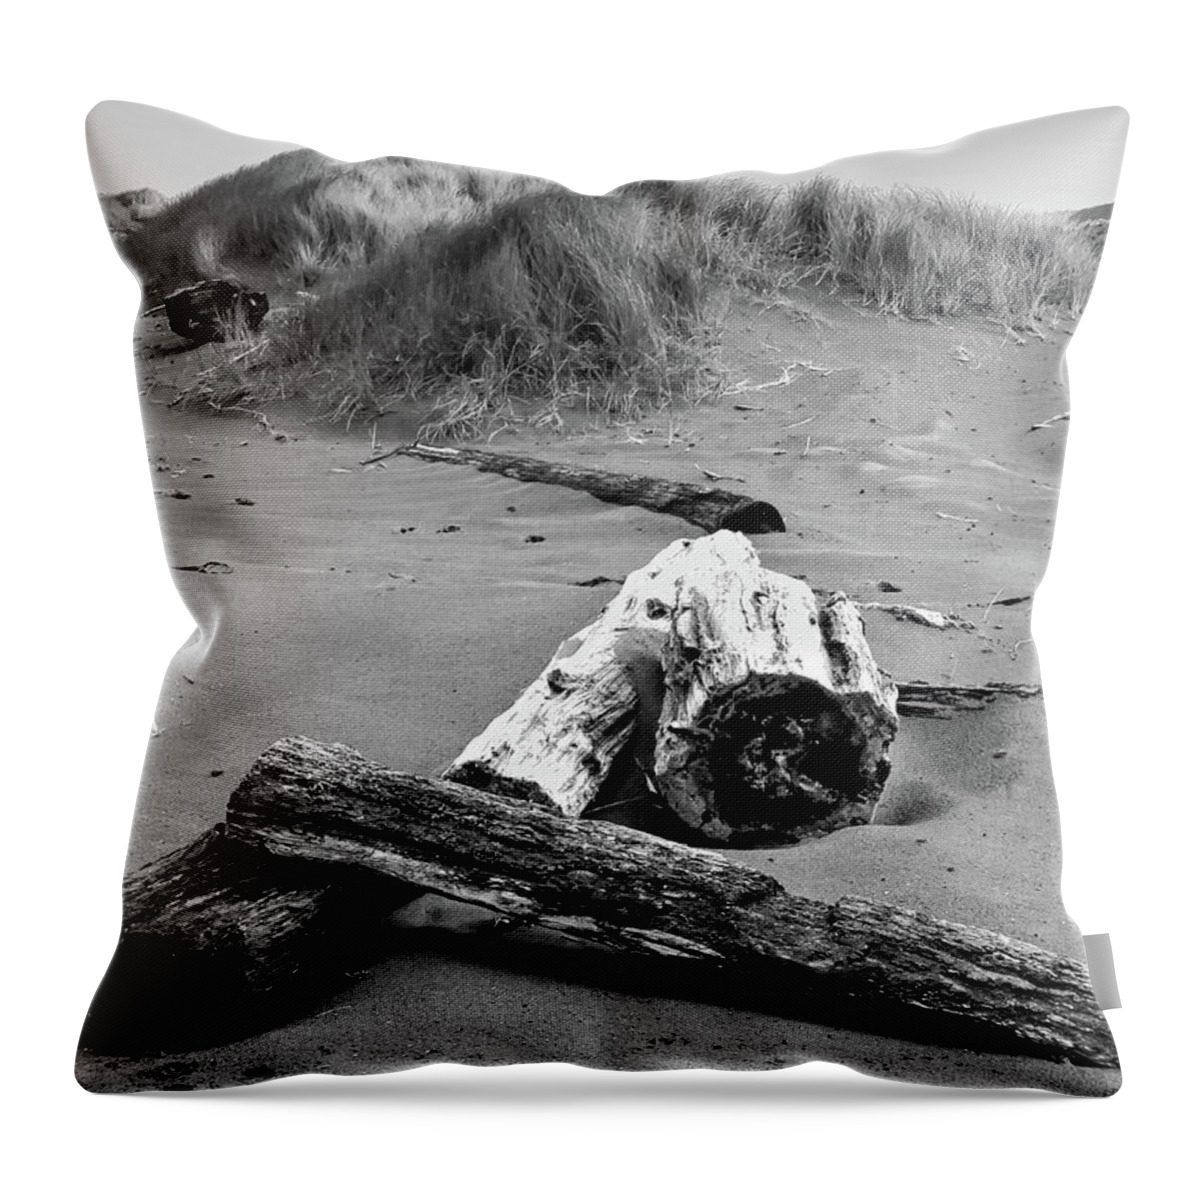  Throw Pillow featuring the photograph Driftwood #1 by Dr Janine Williams